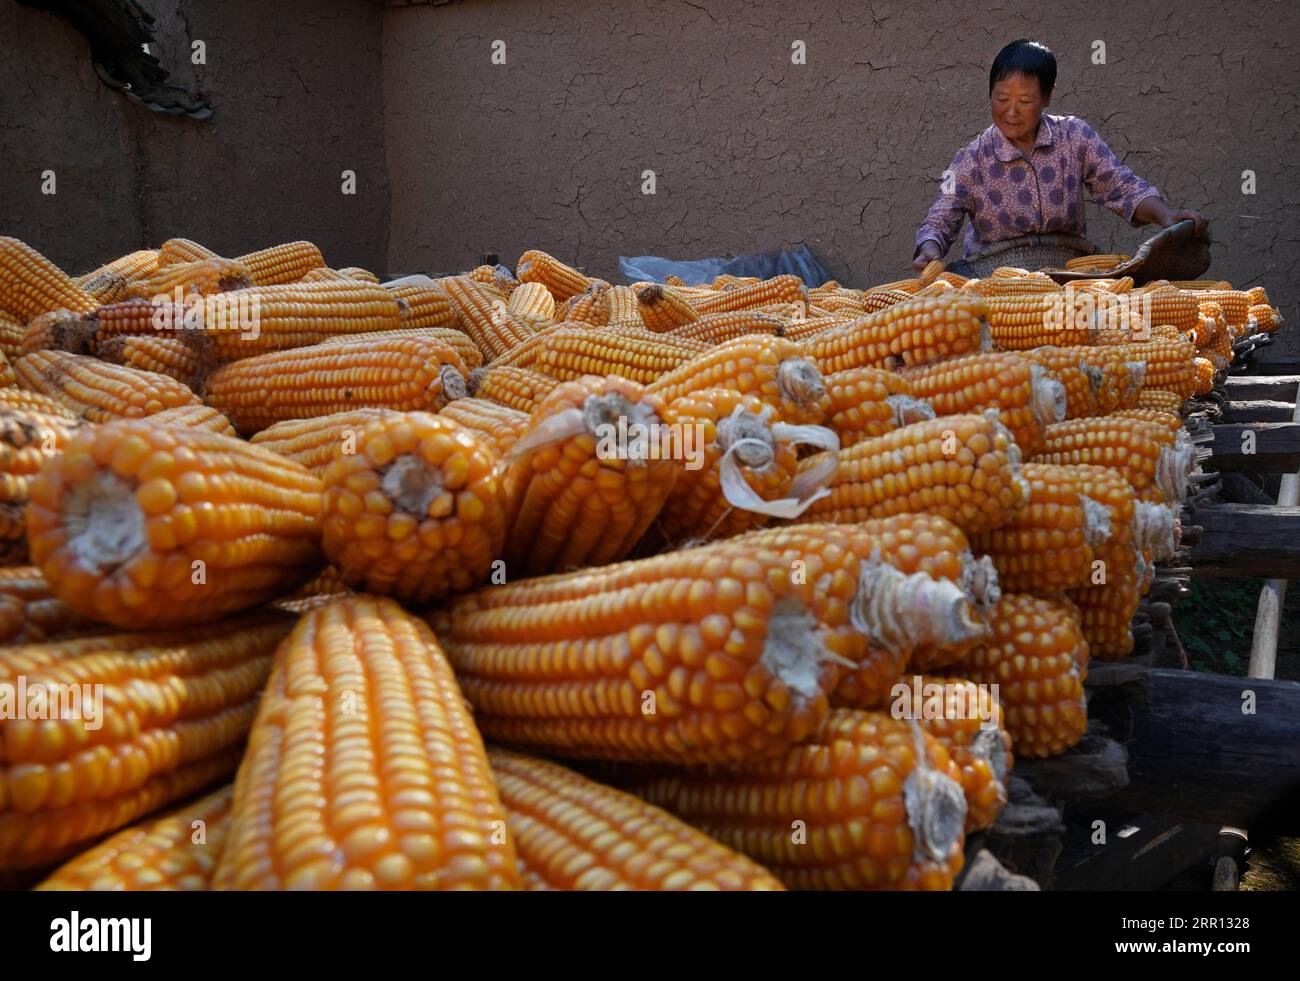 200902 -- SONGXIAN, Sept. 2, 2020 -- A villager dries corns at her yard in Dawanggou Village in Deting Town of Songxian County, Luoyang City, central China s Henan Province, Sept. 2, 2020. Dawanggou Village, located in a mountainous area, used to be an impoverished village. In recent years, the local government has made efforts in improving the living conditions of the villagers, carrying out relocation and renovation work. By improving the appearance of the village, rural tourism has been developed, which helps people here get rid of poverty without working far away from home.  CHINA-HENAN-VI Stock Photo